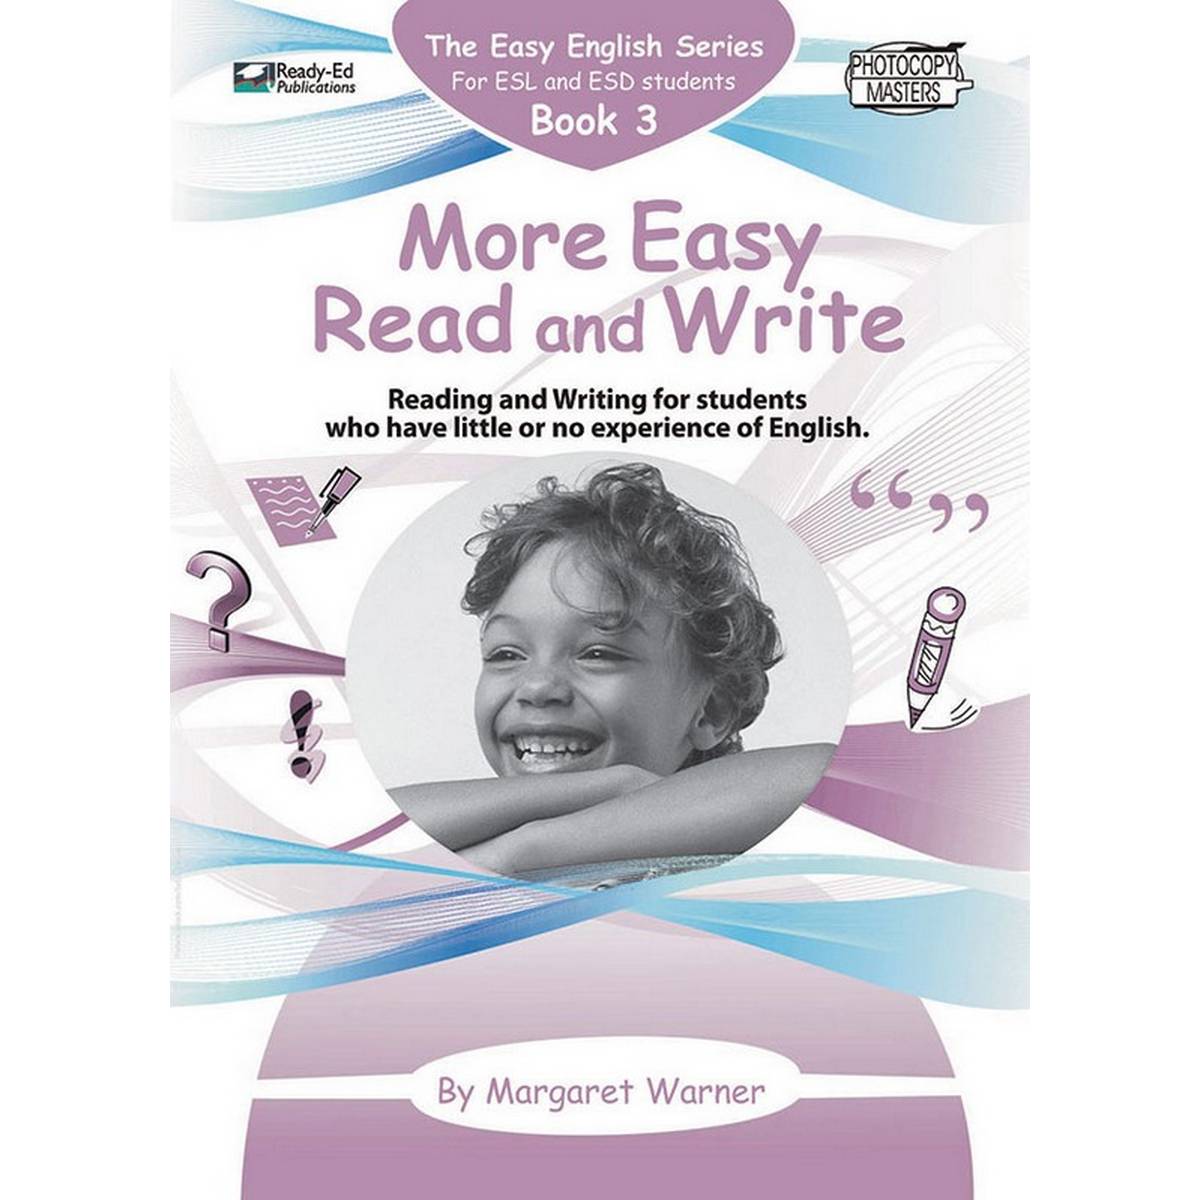 Easy English Series Book 3 More Easy Read and Write